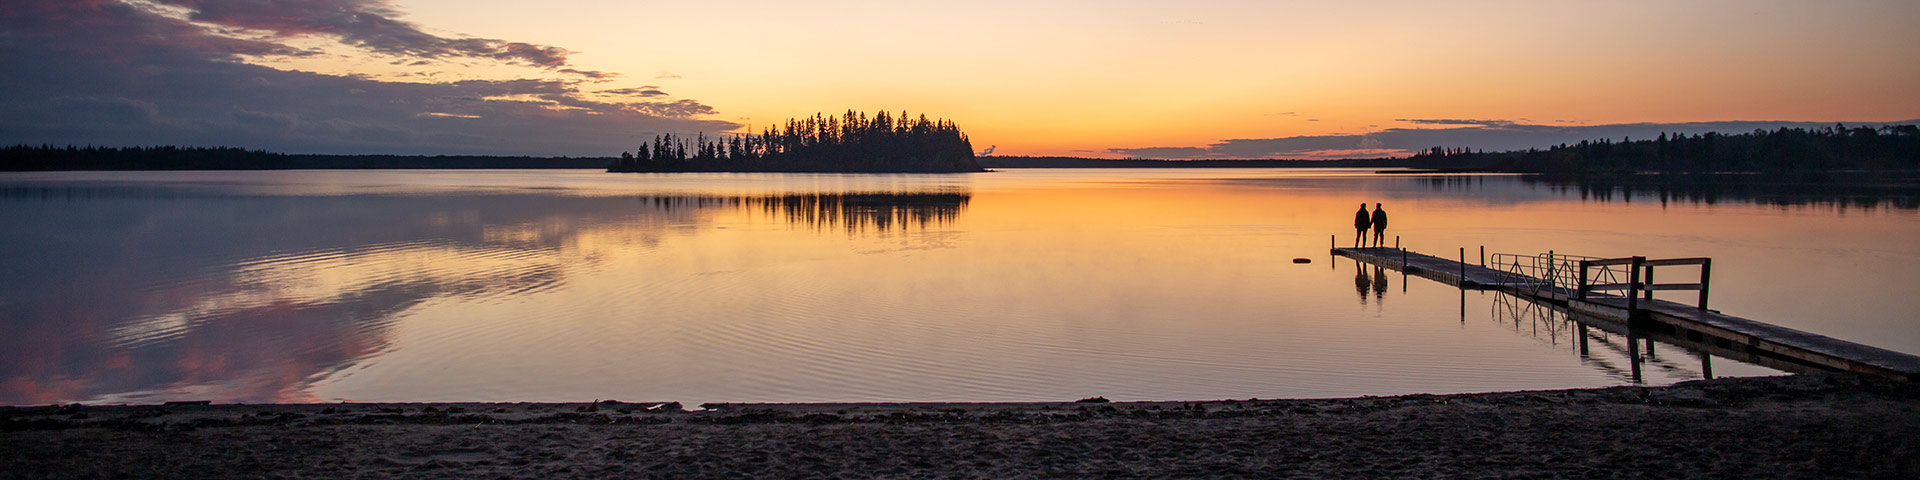 Two visitors stand on the dock and watch the sunset over Astotin Lake, Elk Island National Park.